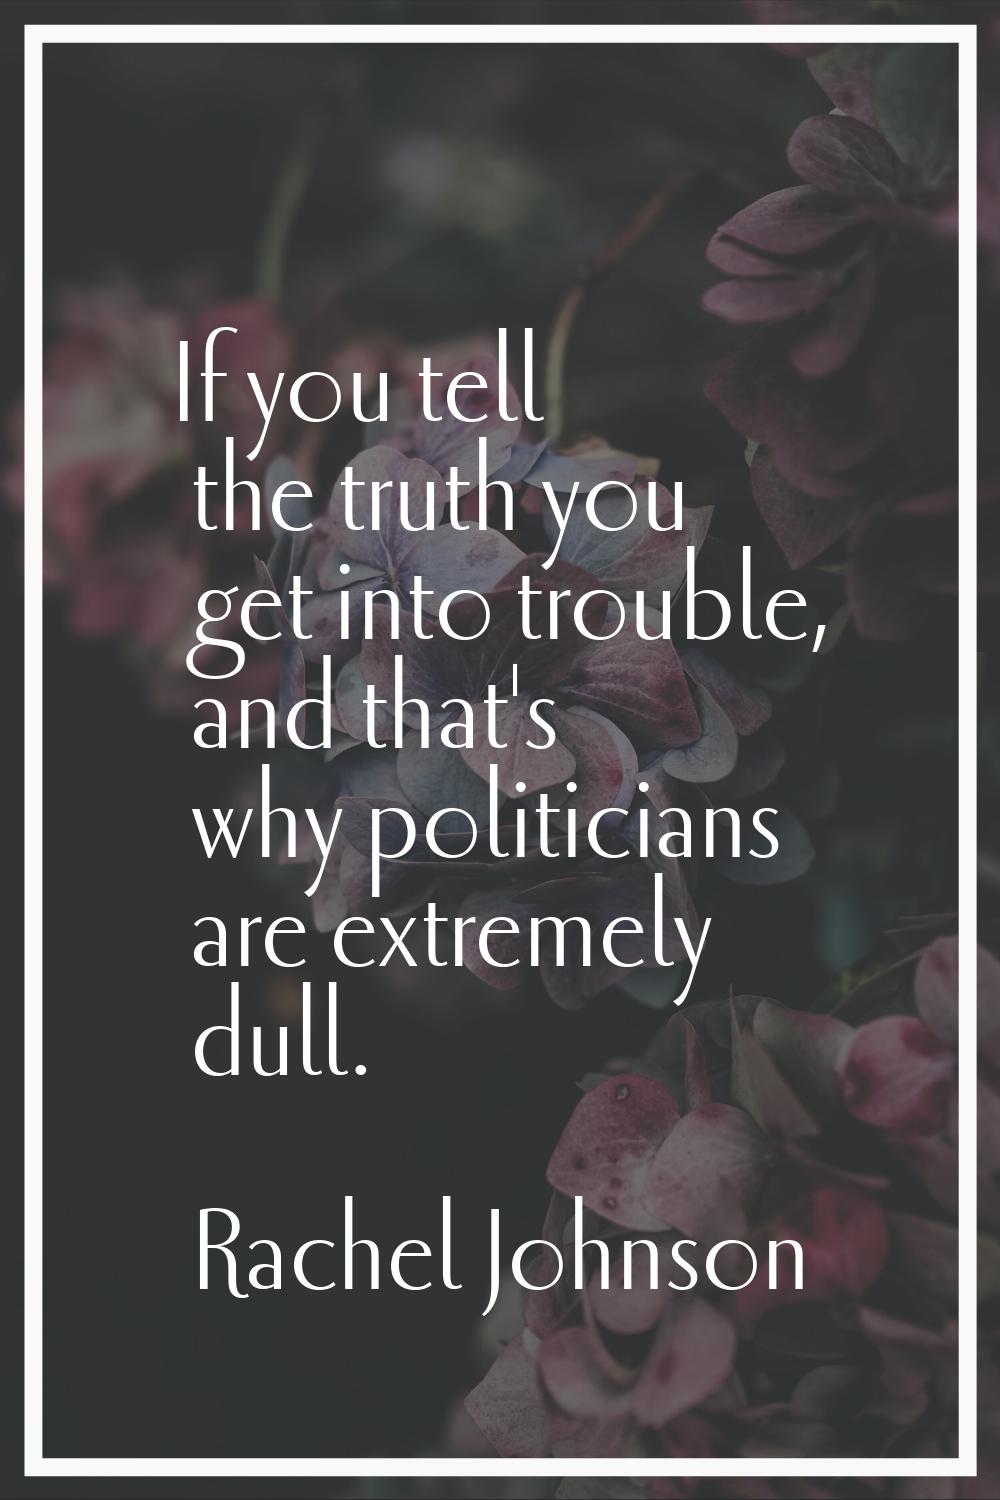 If you tell the truth you get into trouble, and that's why politicians are extremely dull.